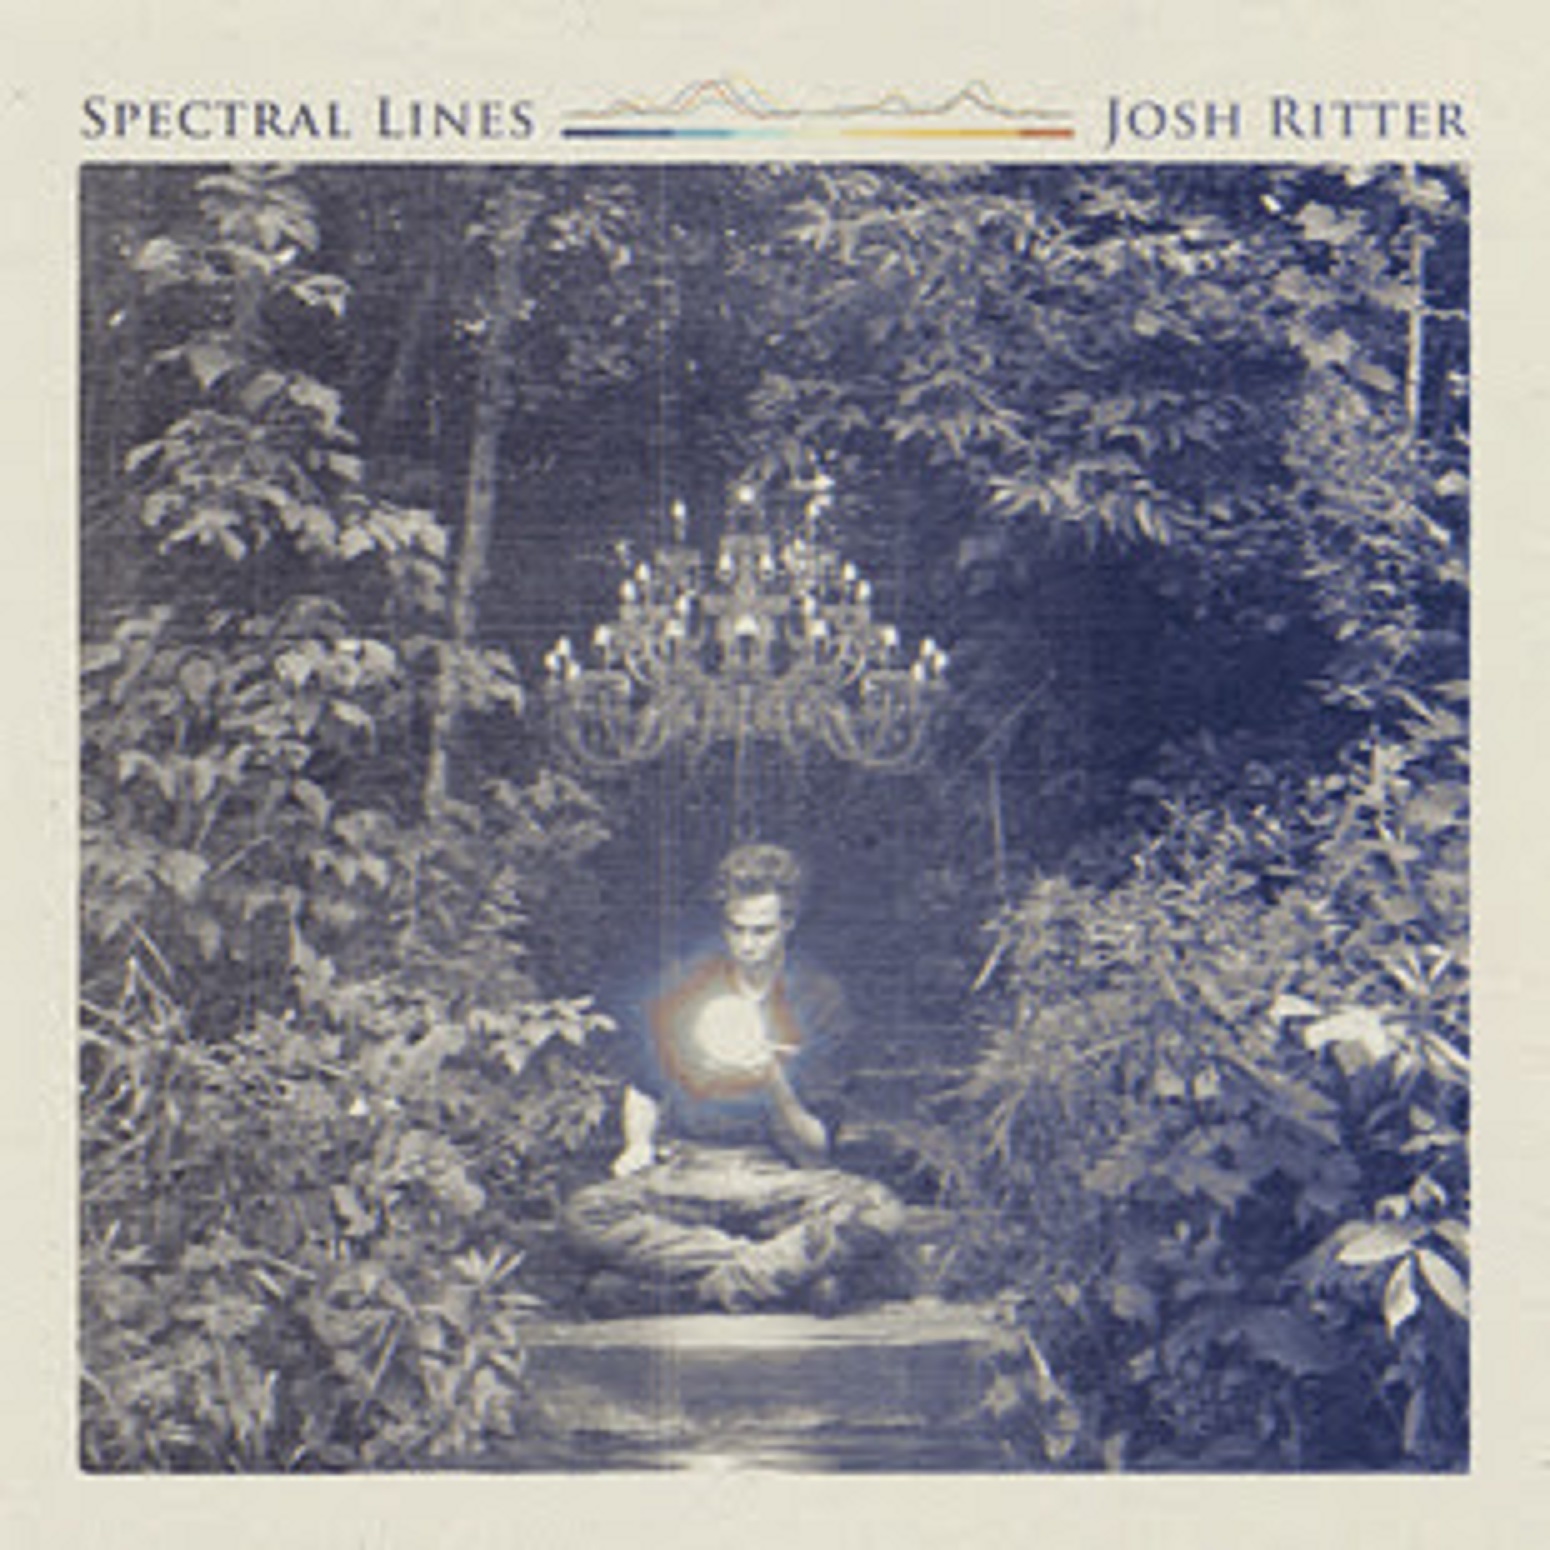 Josh Ritter returns with new album "Spectral Lines" on April 28